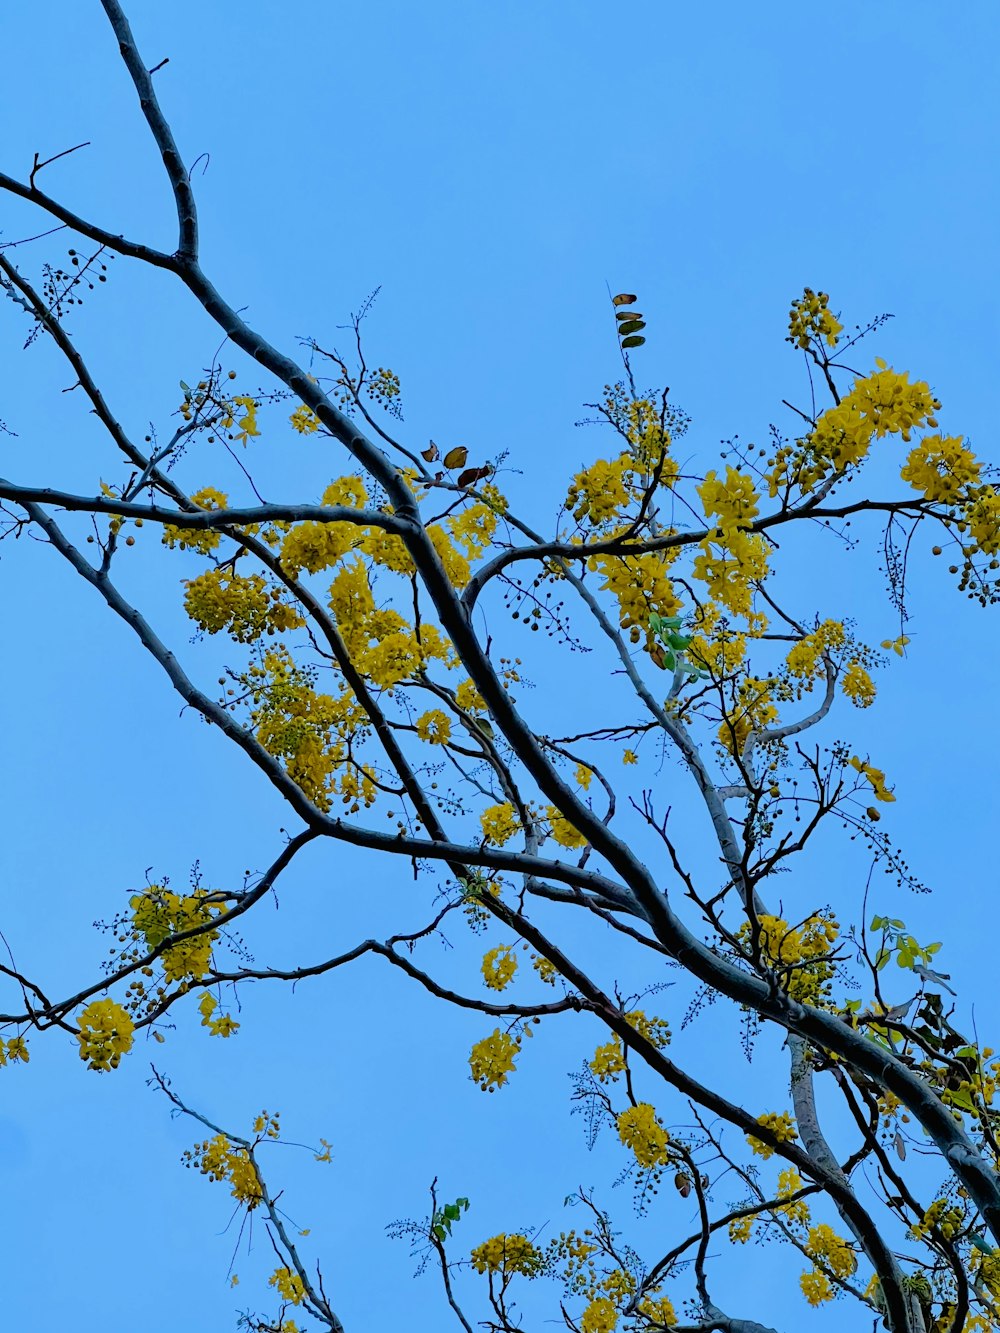 a tree branch with yellow flowers against a blue sky